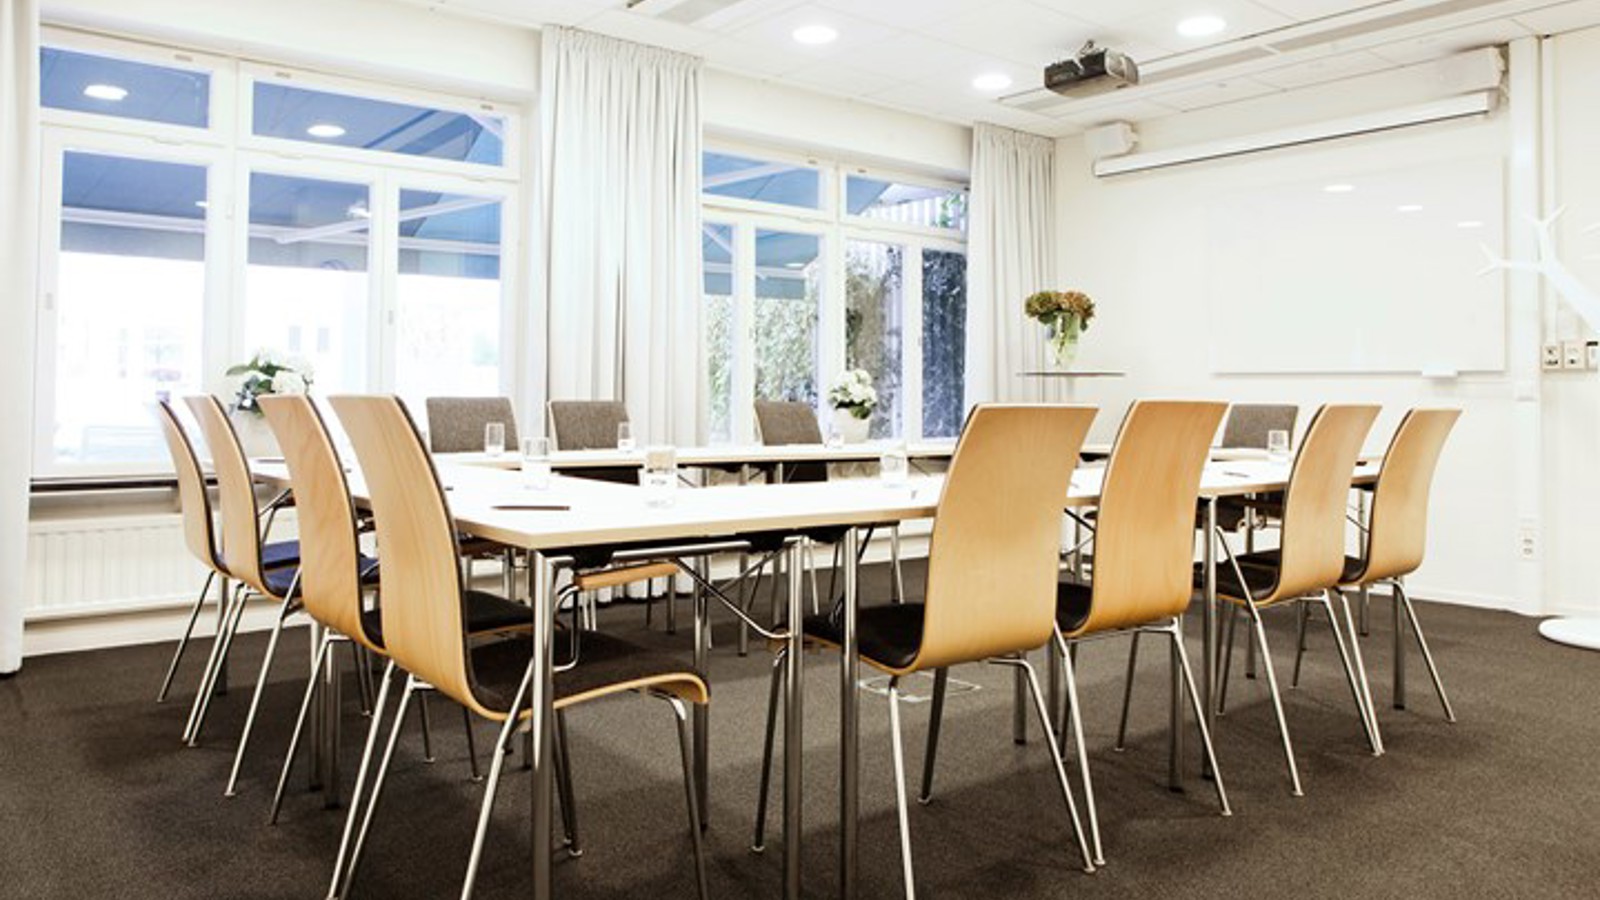 Conference room with u-shaped seating, white walls, large windows and gray carpet